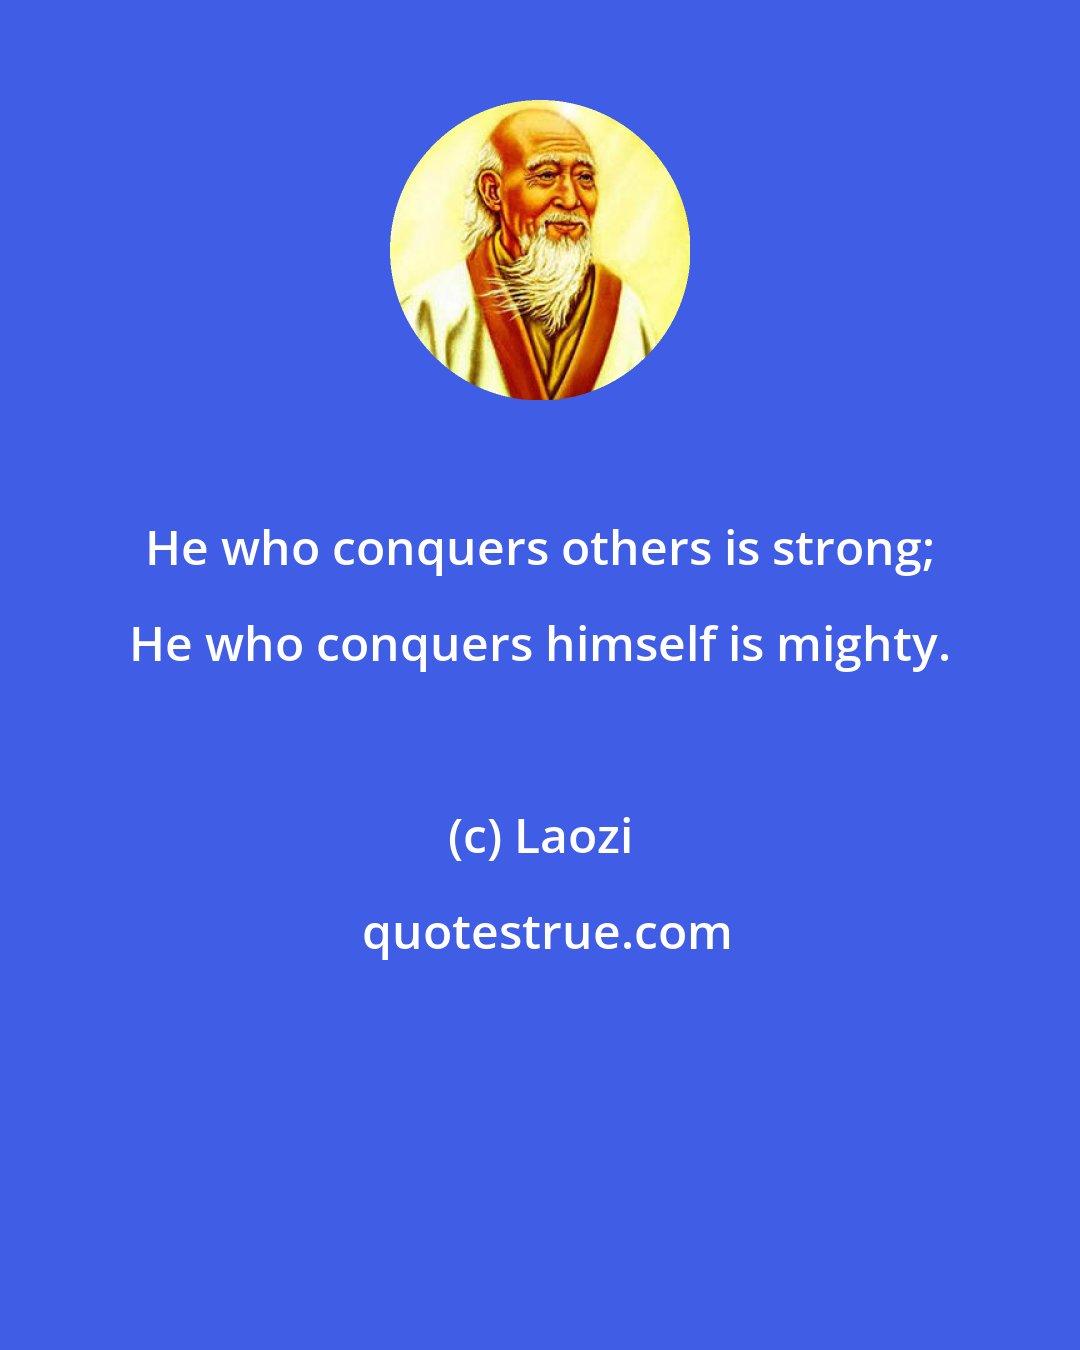 Laozi: He who conquers others is strong; He who conquers himself is mighty.